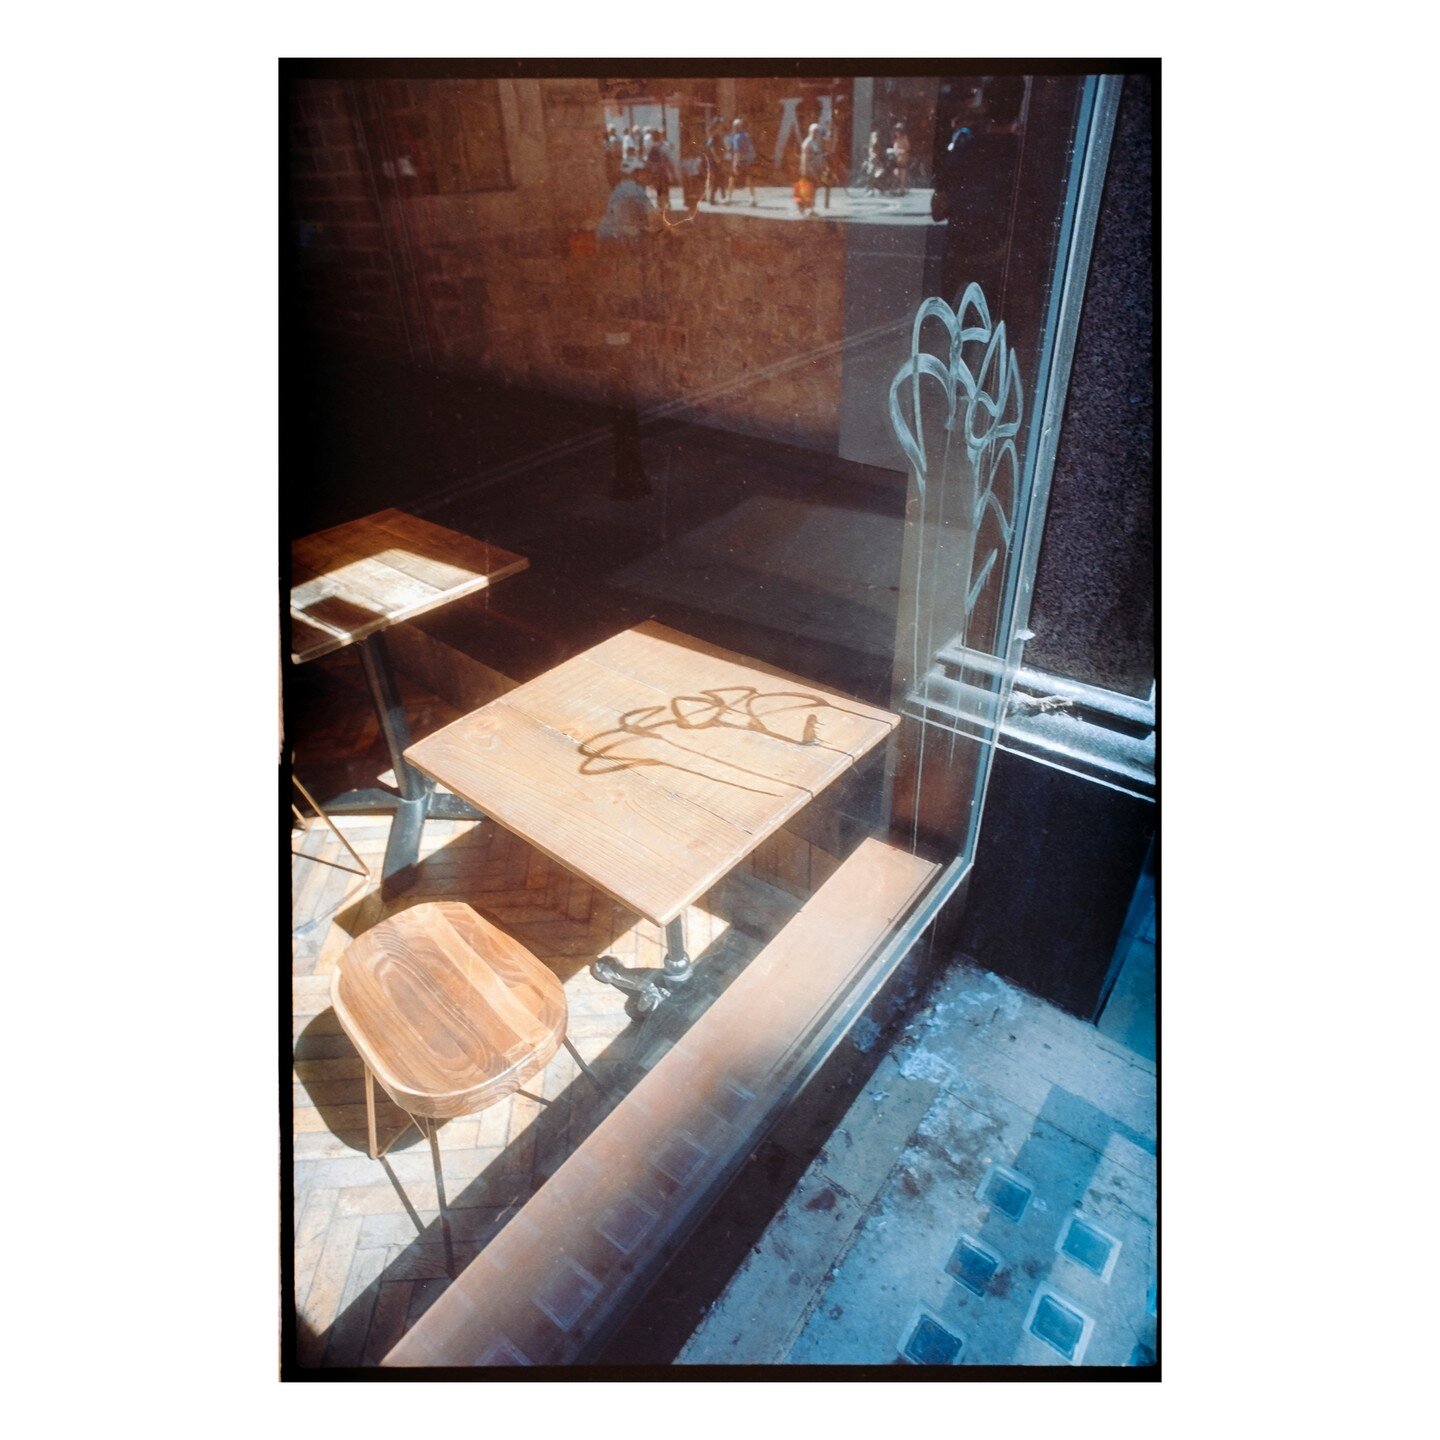 Tables and Tags

#NikonF2 #portra160 #sublimestreet #streetsgrammer #street_avengers #streethunters #eyeshotmag #streets_storytelling #lensculturestreets #thestreetphotographyhub #supersweetstreet #capturestreets #streetphotographers #SPiCollective #